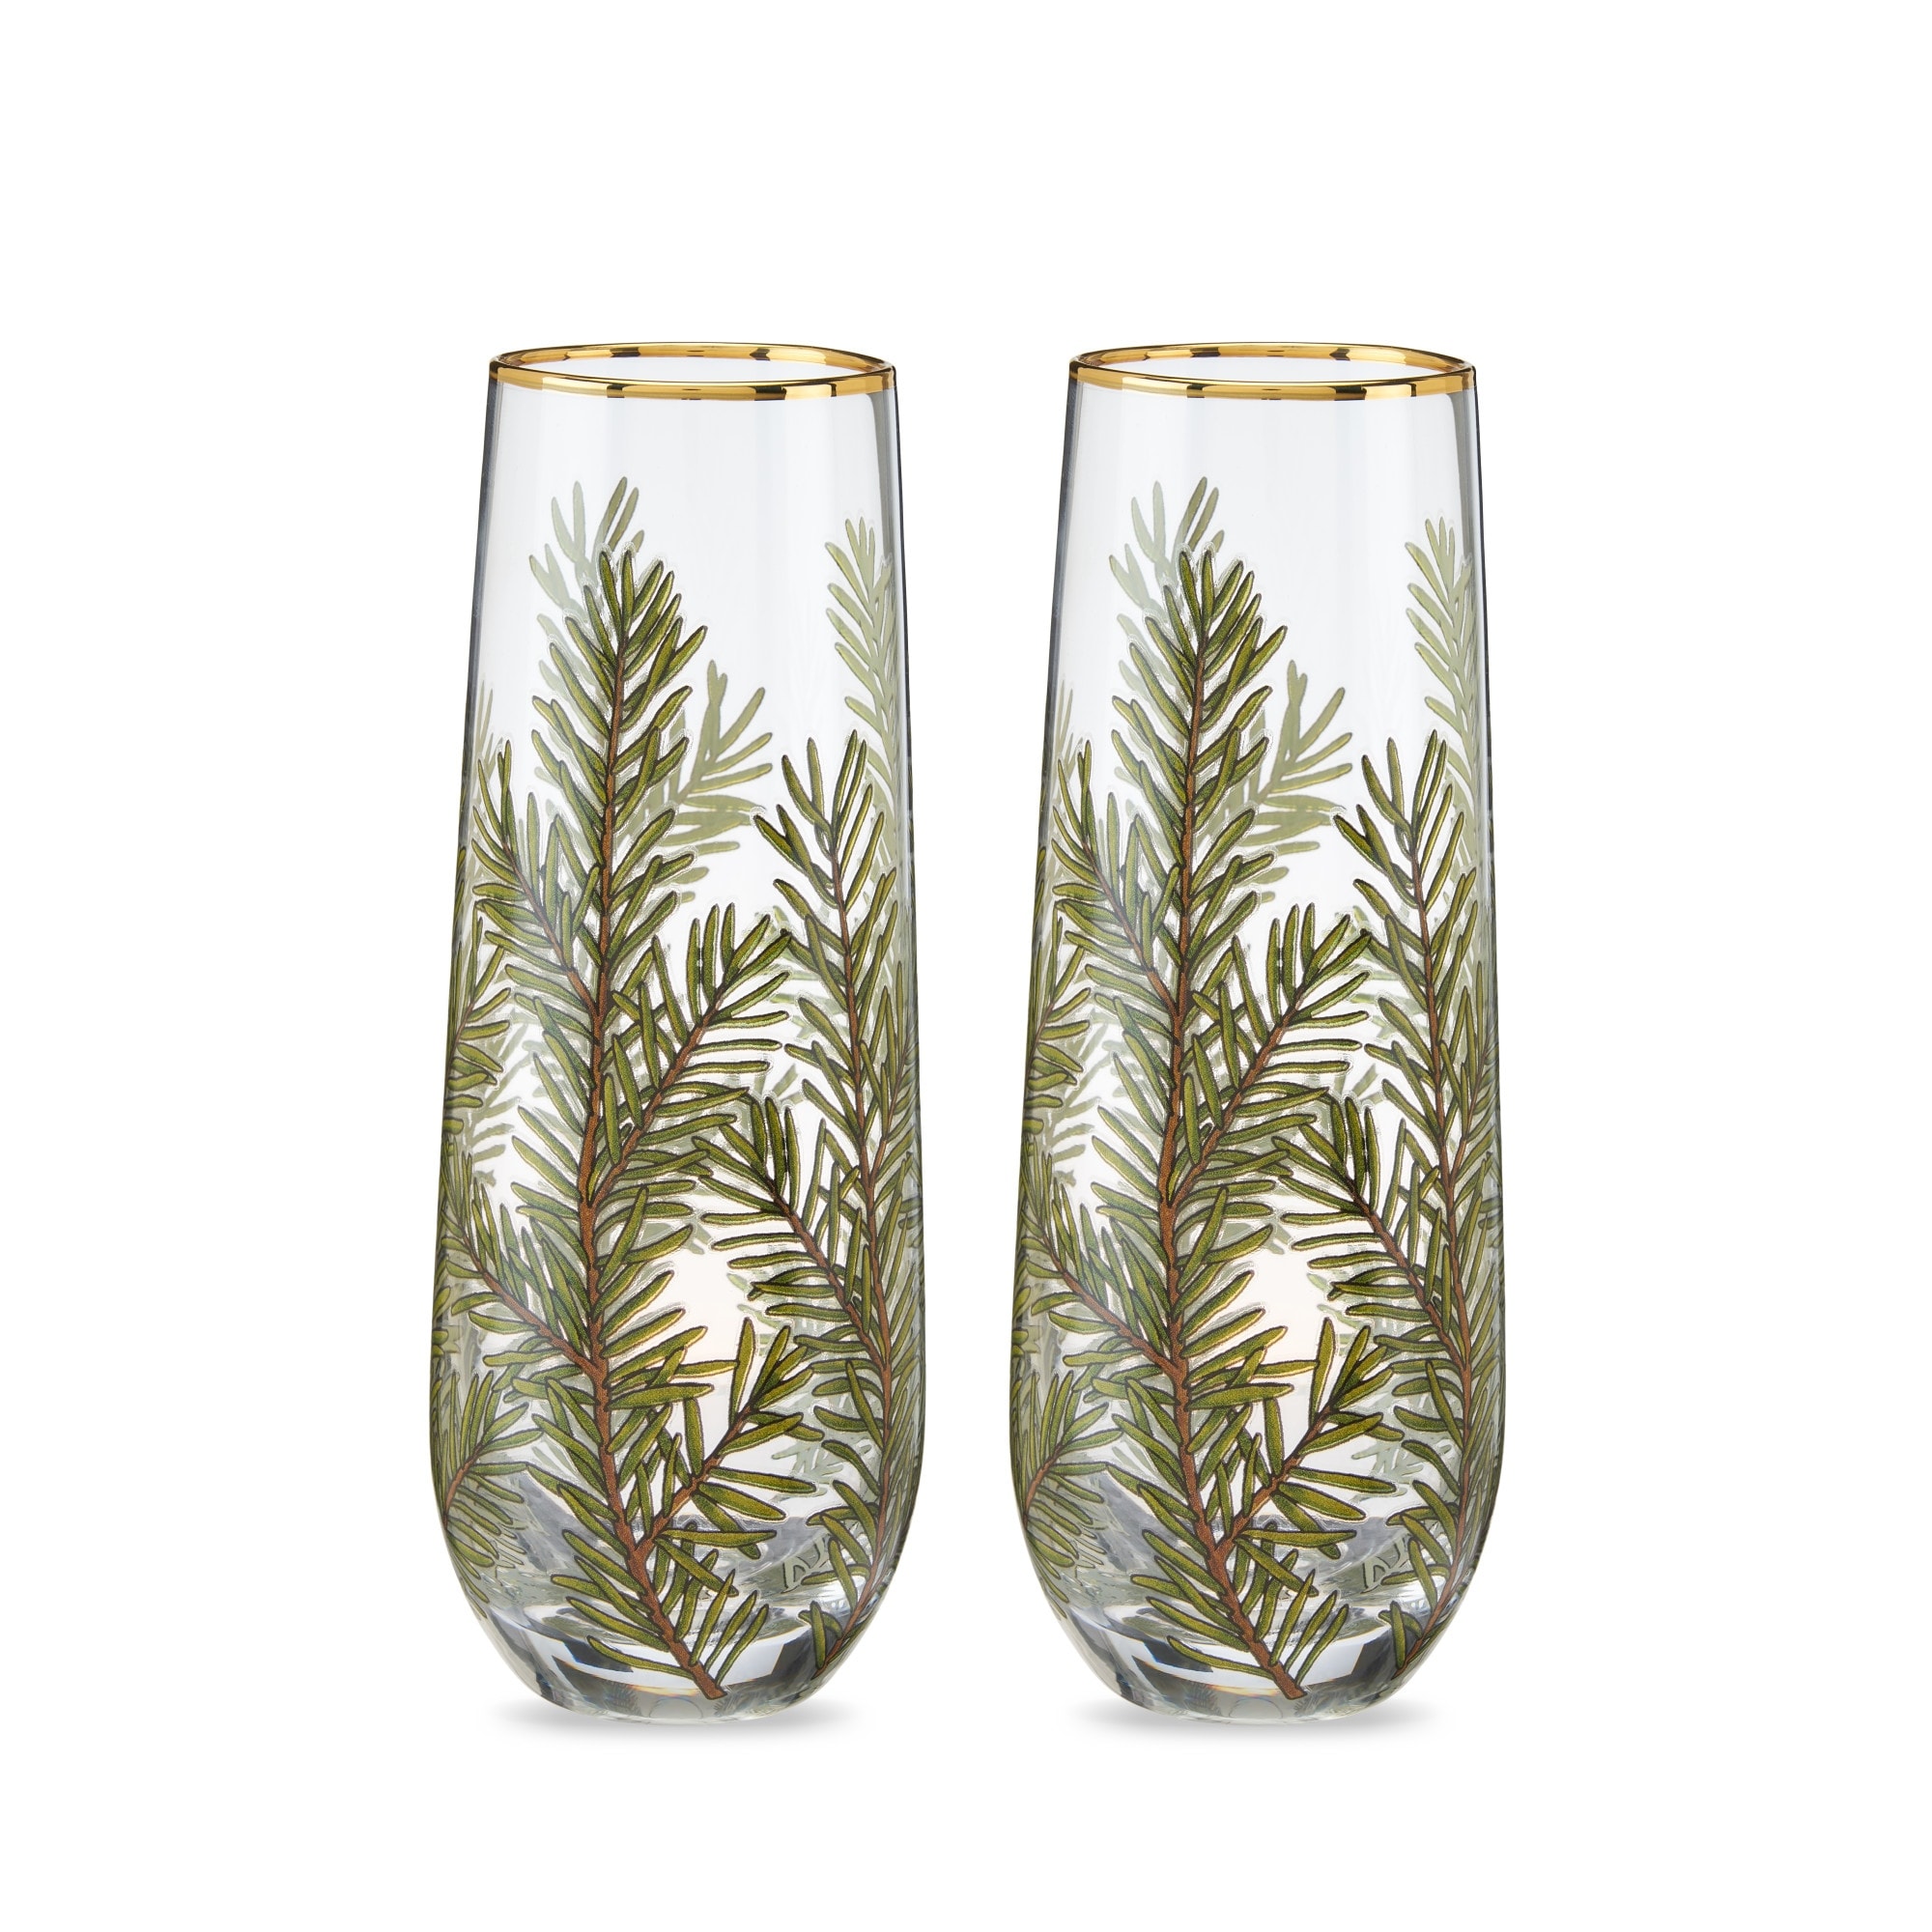 https://ak1.ostkcdn.com/images/products/is/images/direct/5061fb30983d2f5c80f97c73981a5532b4fd0fa6/Woodland-Stemless-Champagne-Flute-by-Twine-Living%C2%AE-%28Set-of-2%29.jpg